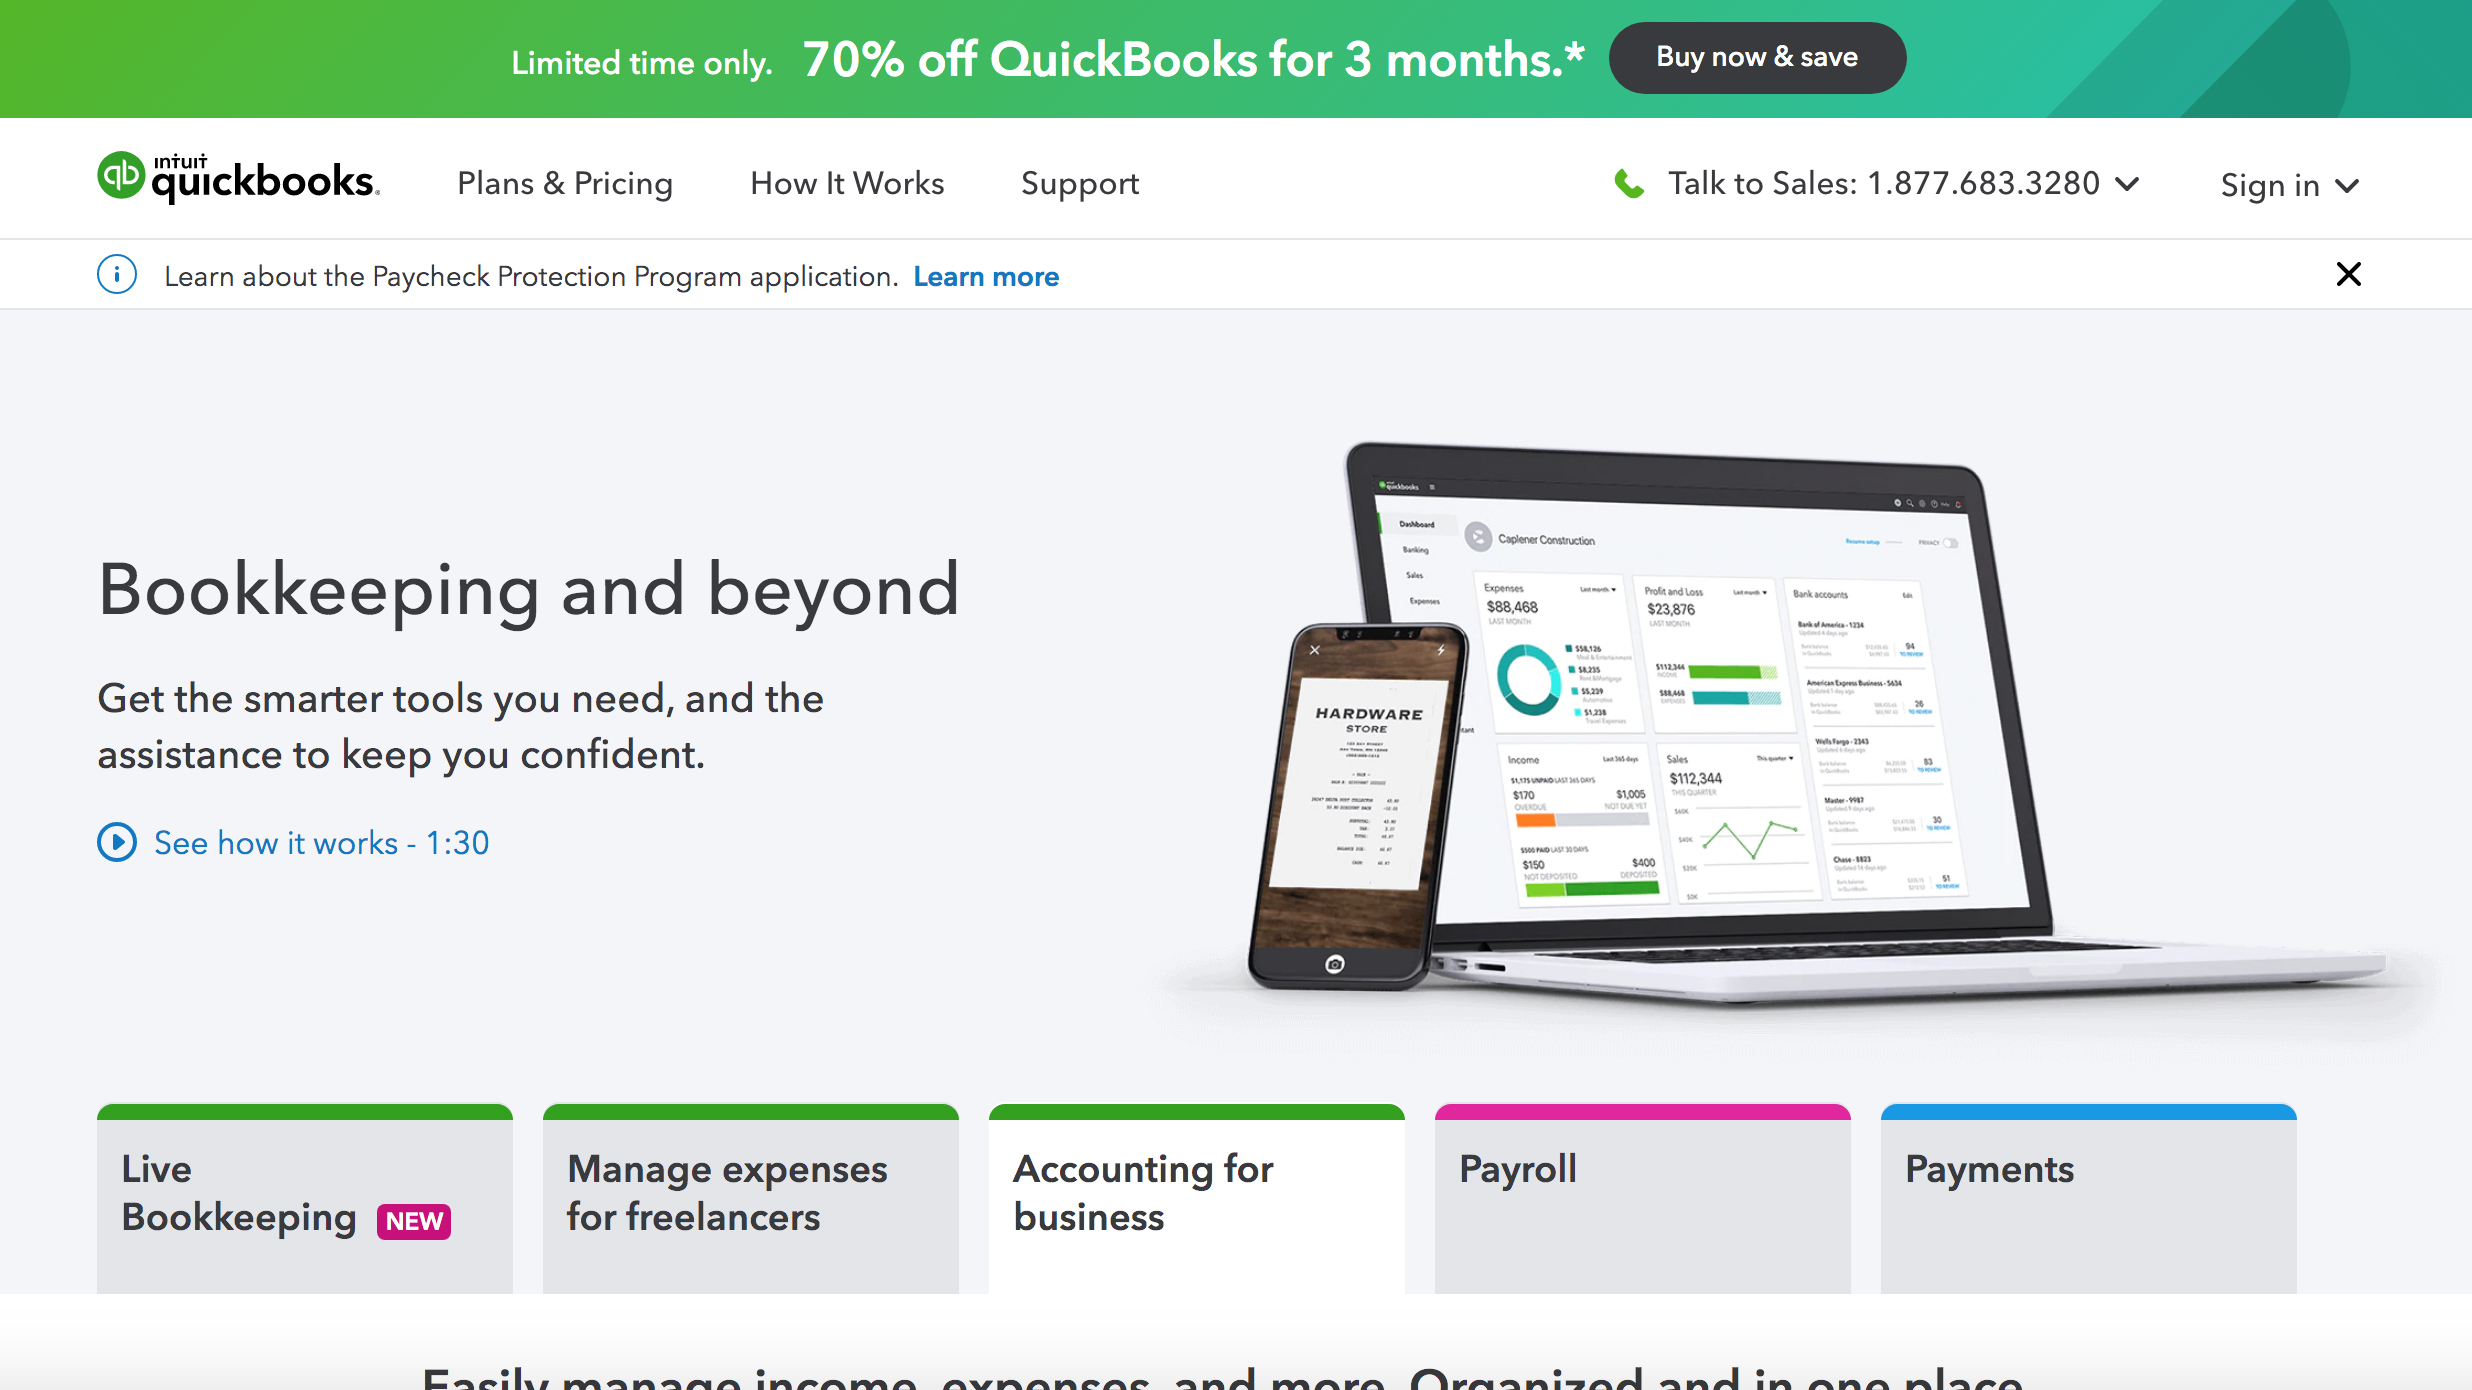 quickbooks for the mac reviews